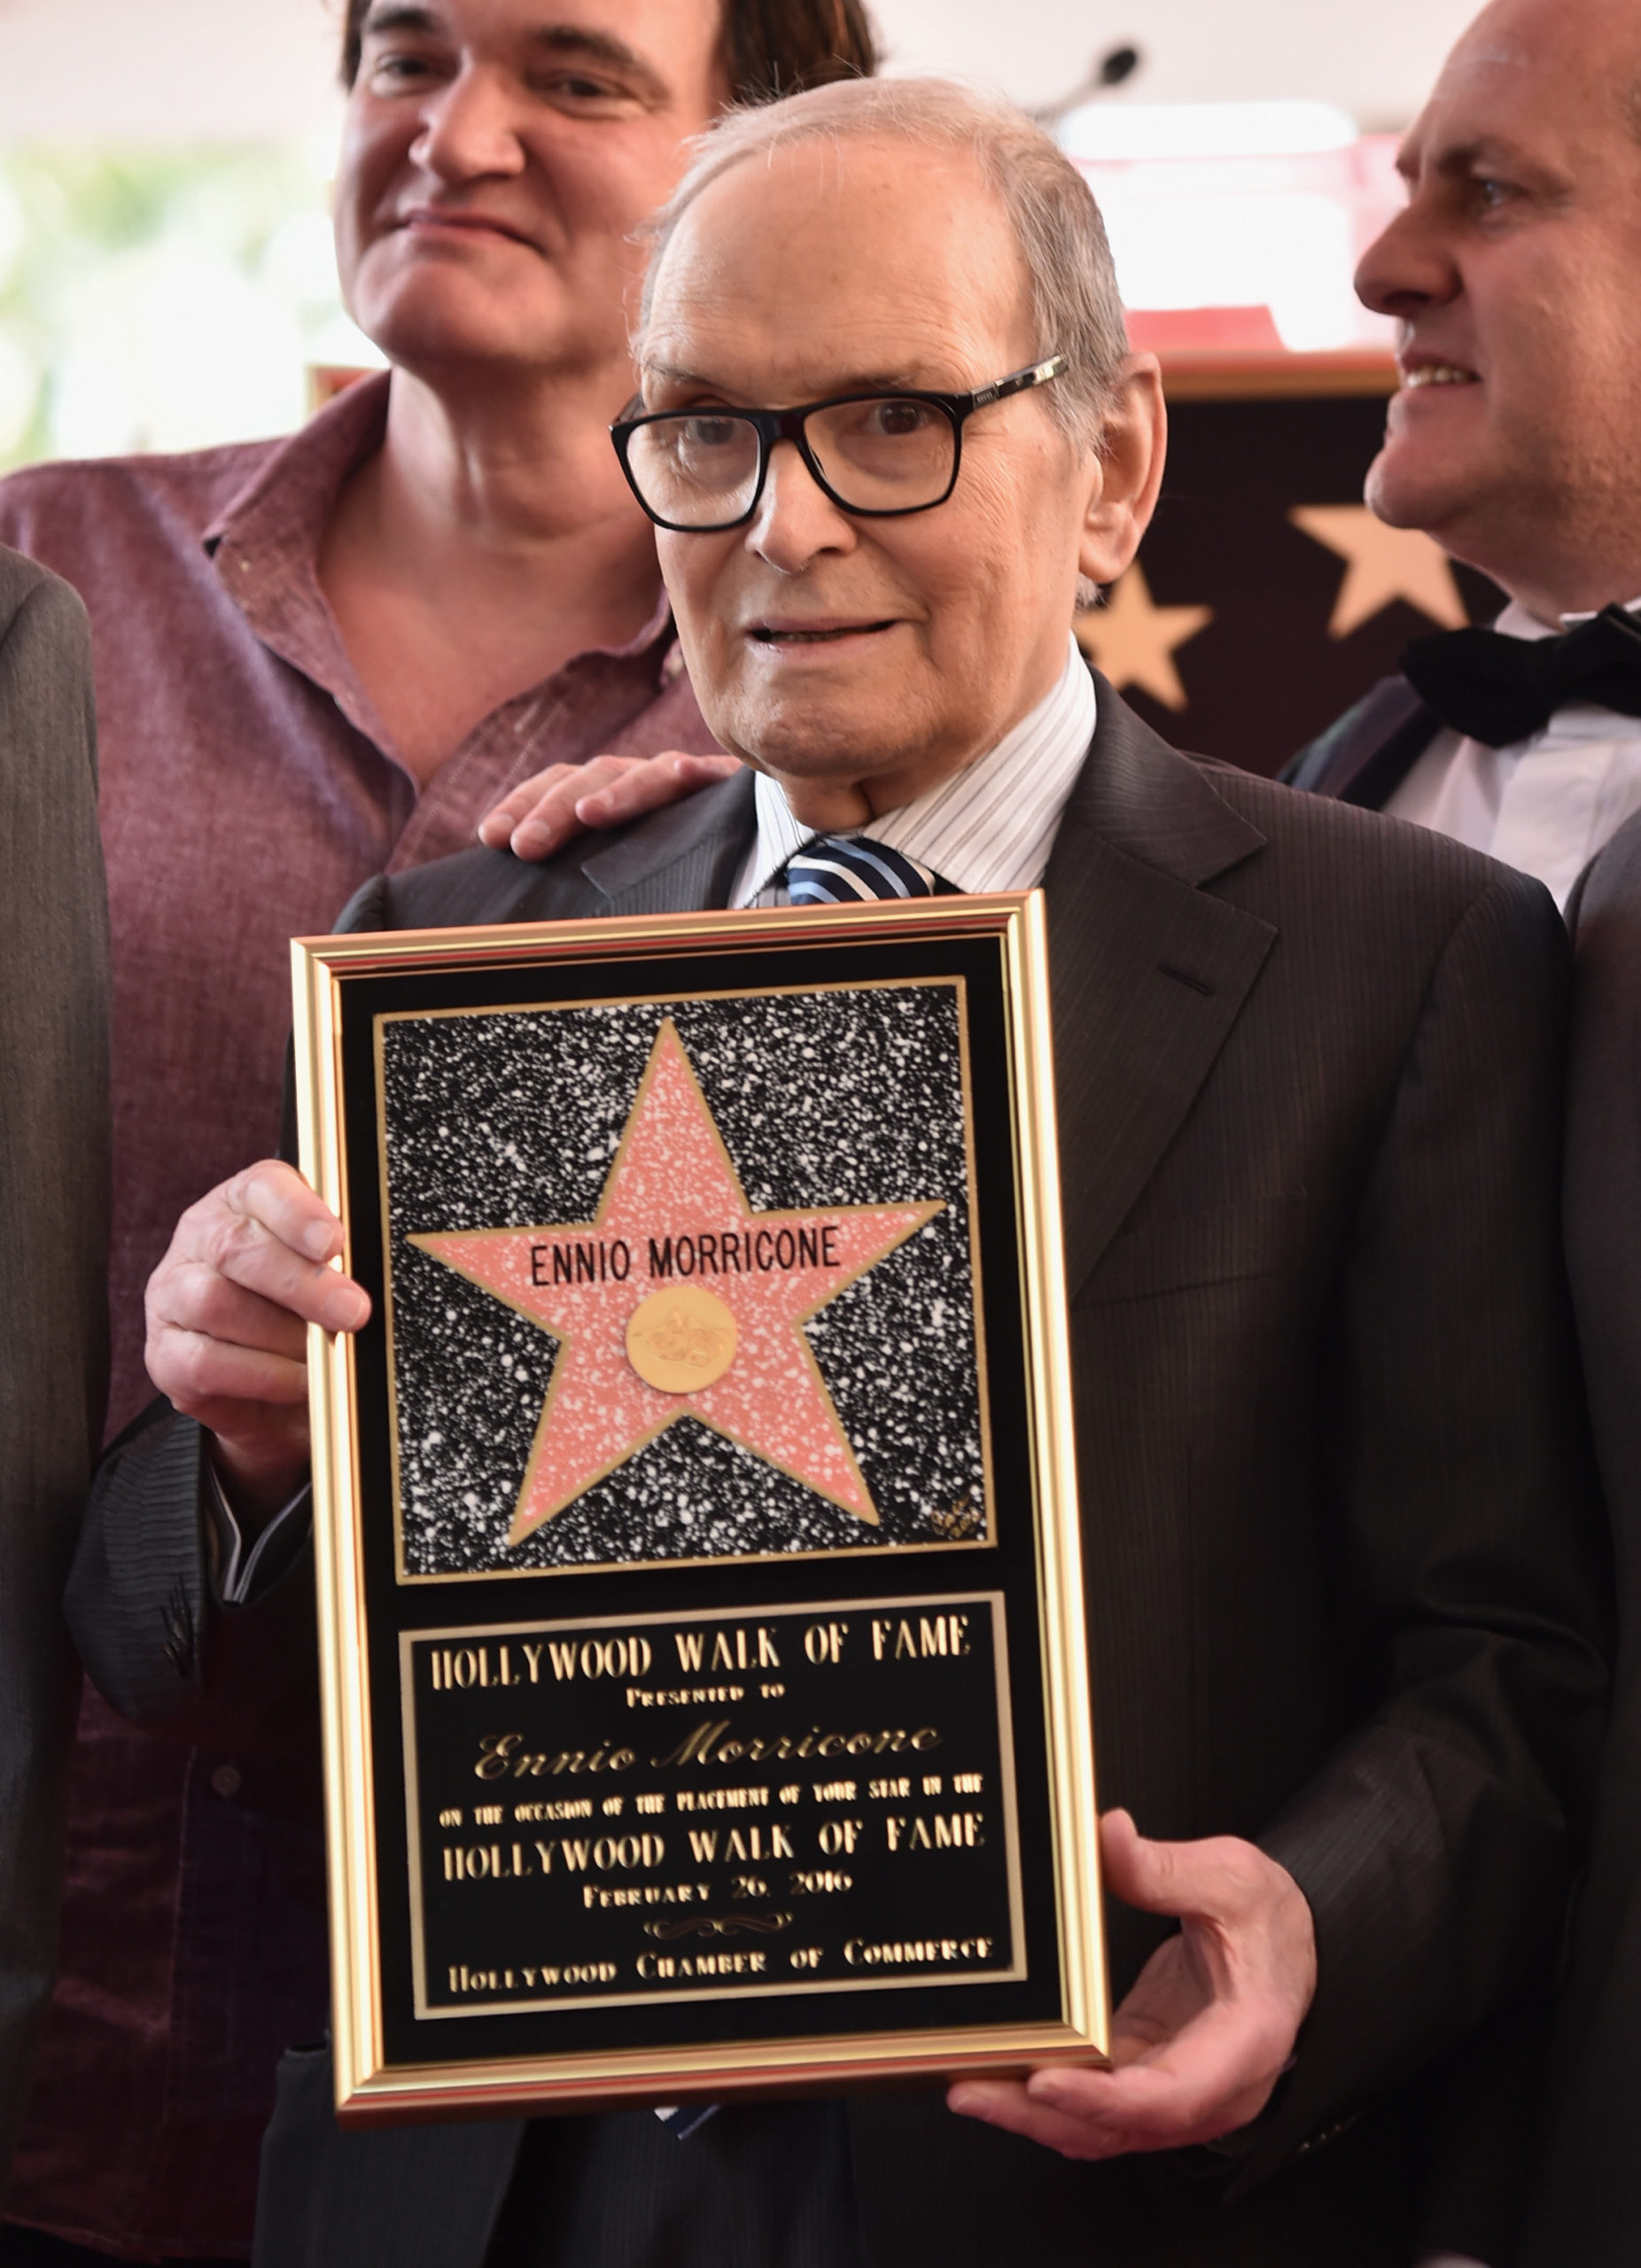 HOLLYWOOD, CA - FEBRUARY 26: Composer Ennio Morricone attends a ceremony honoring him with the 2,575th Star on The Hollywood Walk of Fame on February 26, 2016 in Hollywood, California.   Alberto E. Rodriguez/Getty Images/AFP